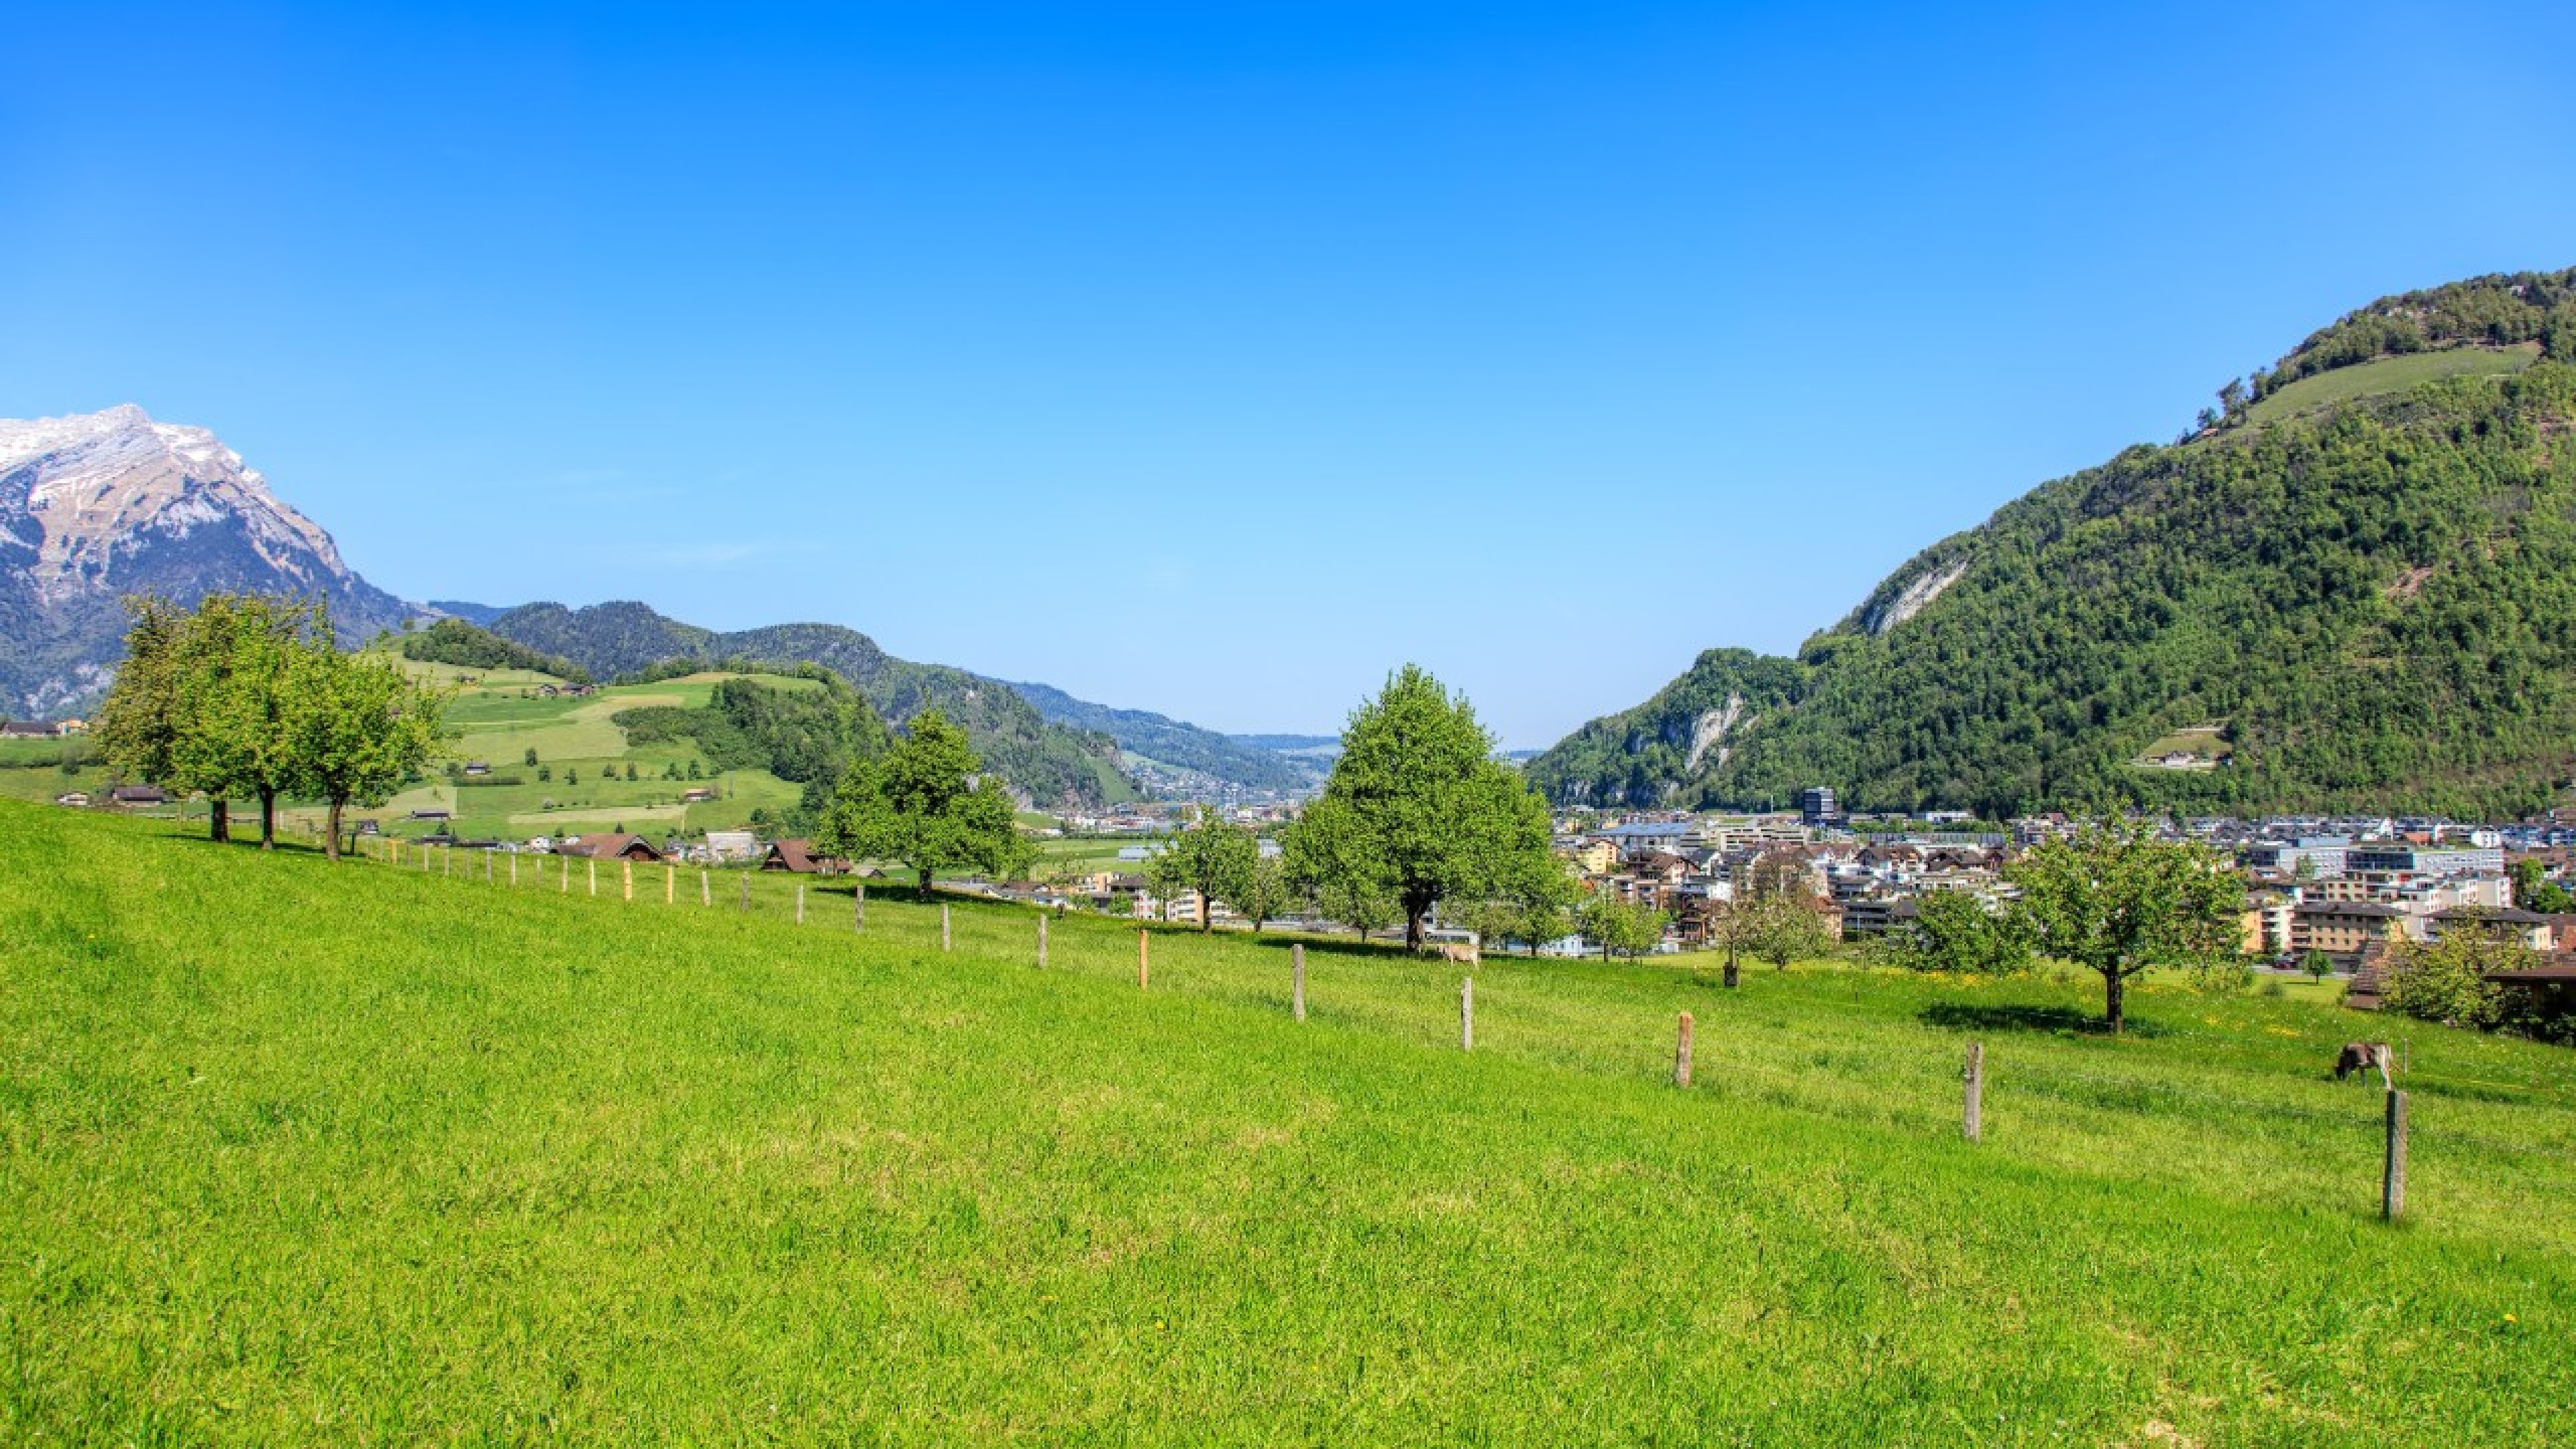 Landscape in the Swiss canton of Nidwalden, in the region of the town of Stans, in the beginning of May.